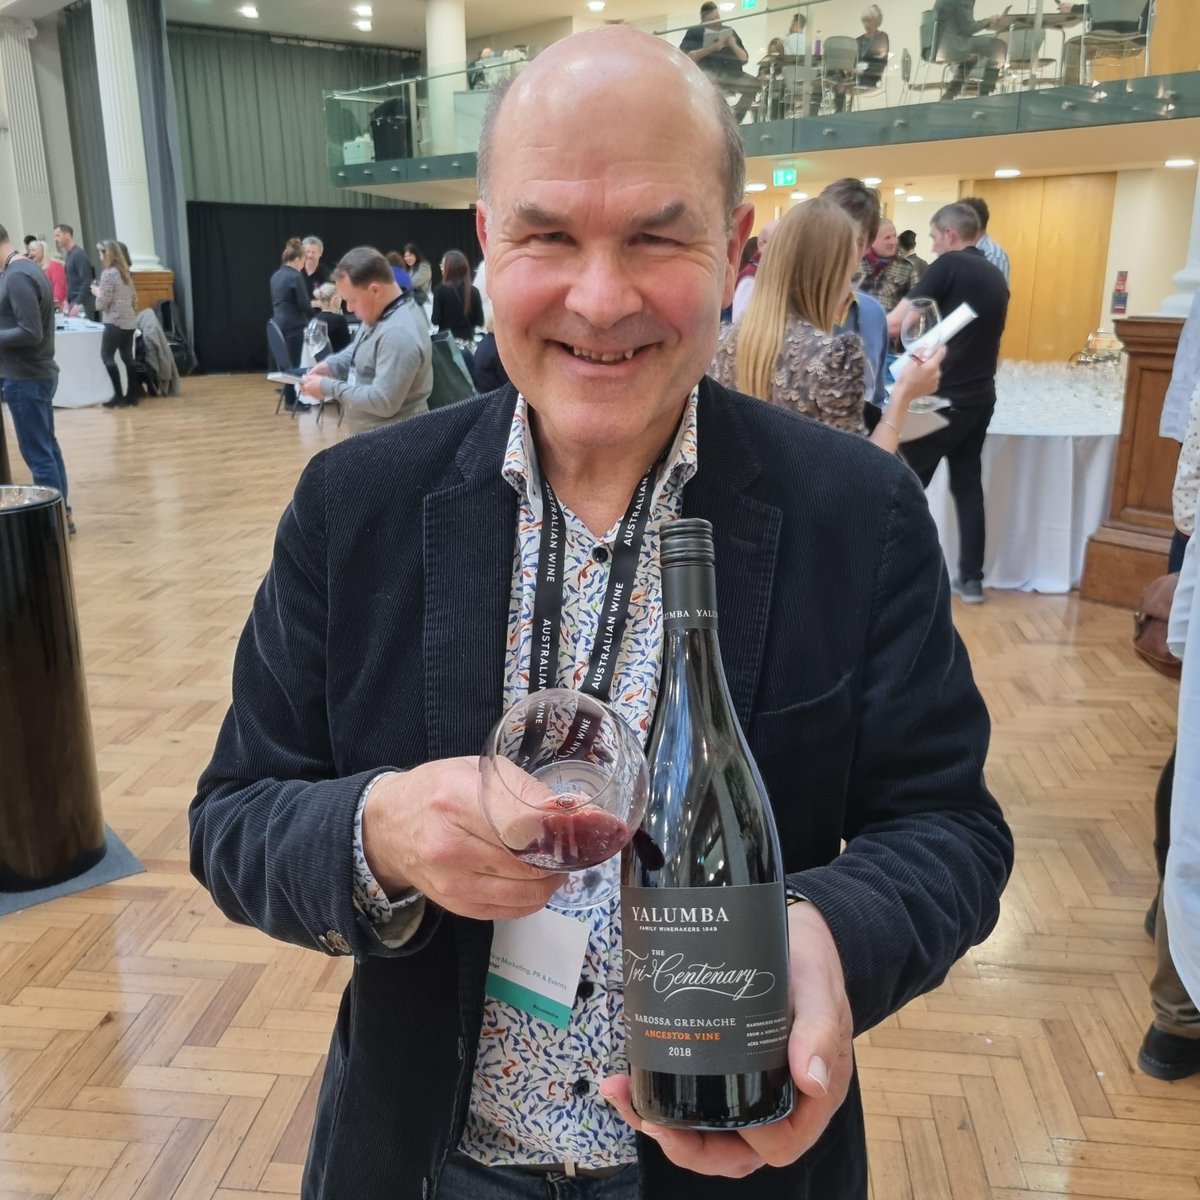 Fantastic, energetic and innovative Australia Trade Tasting #greatjob #aussiewine #ATTwine . There were so many exciting wines, including Yalumba's 'The Tri-Centenary' Barossa Valley Grenache 2018. Beautiful medium red, needs to be savoured. A great example of Aussie Grenache 👏